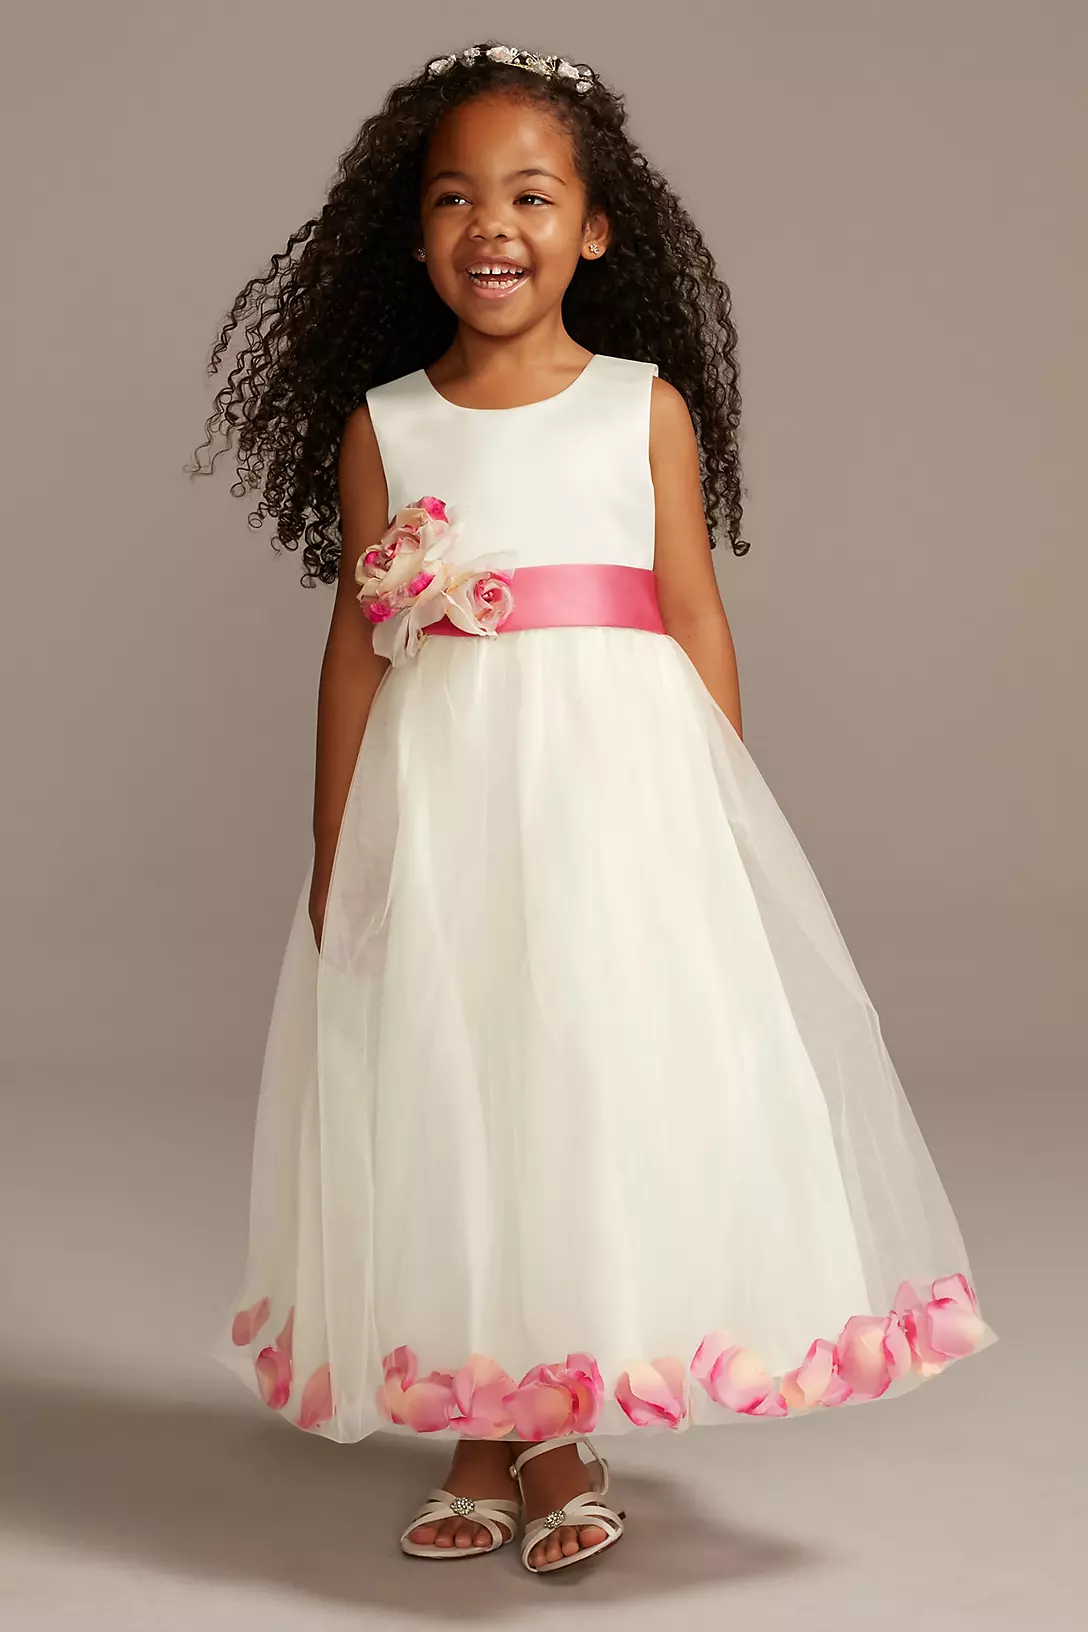 Tulle Skirt Flower Girl Dress with Colored Petals Image